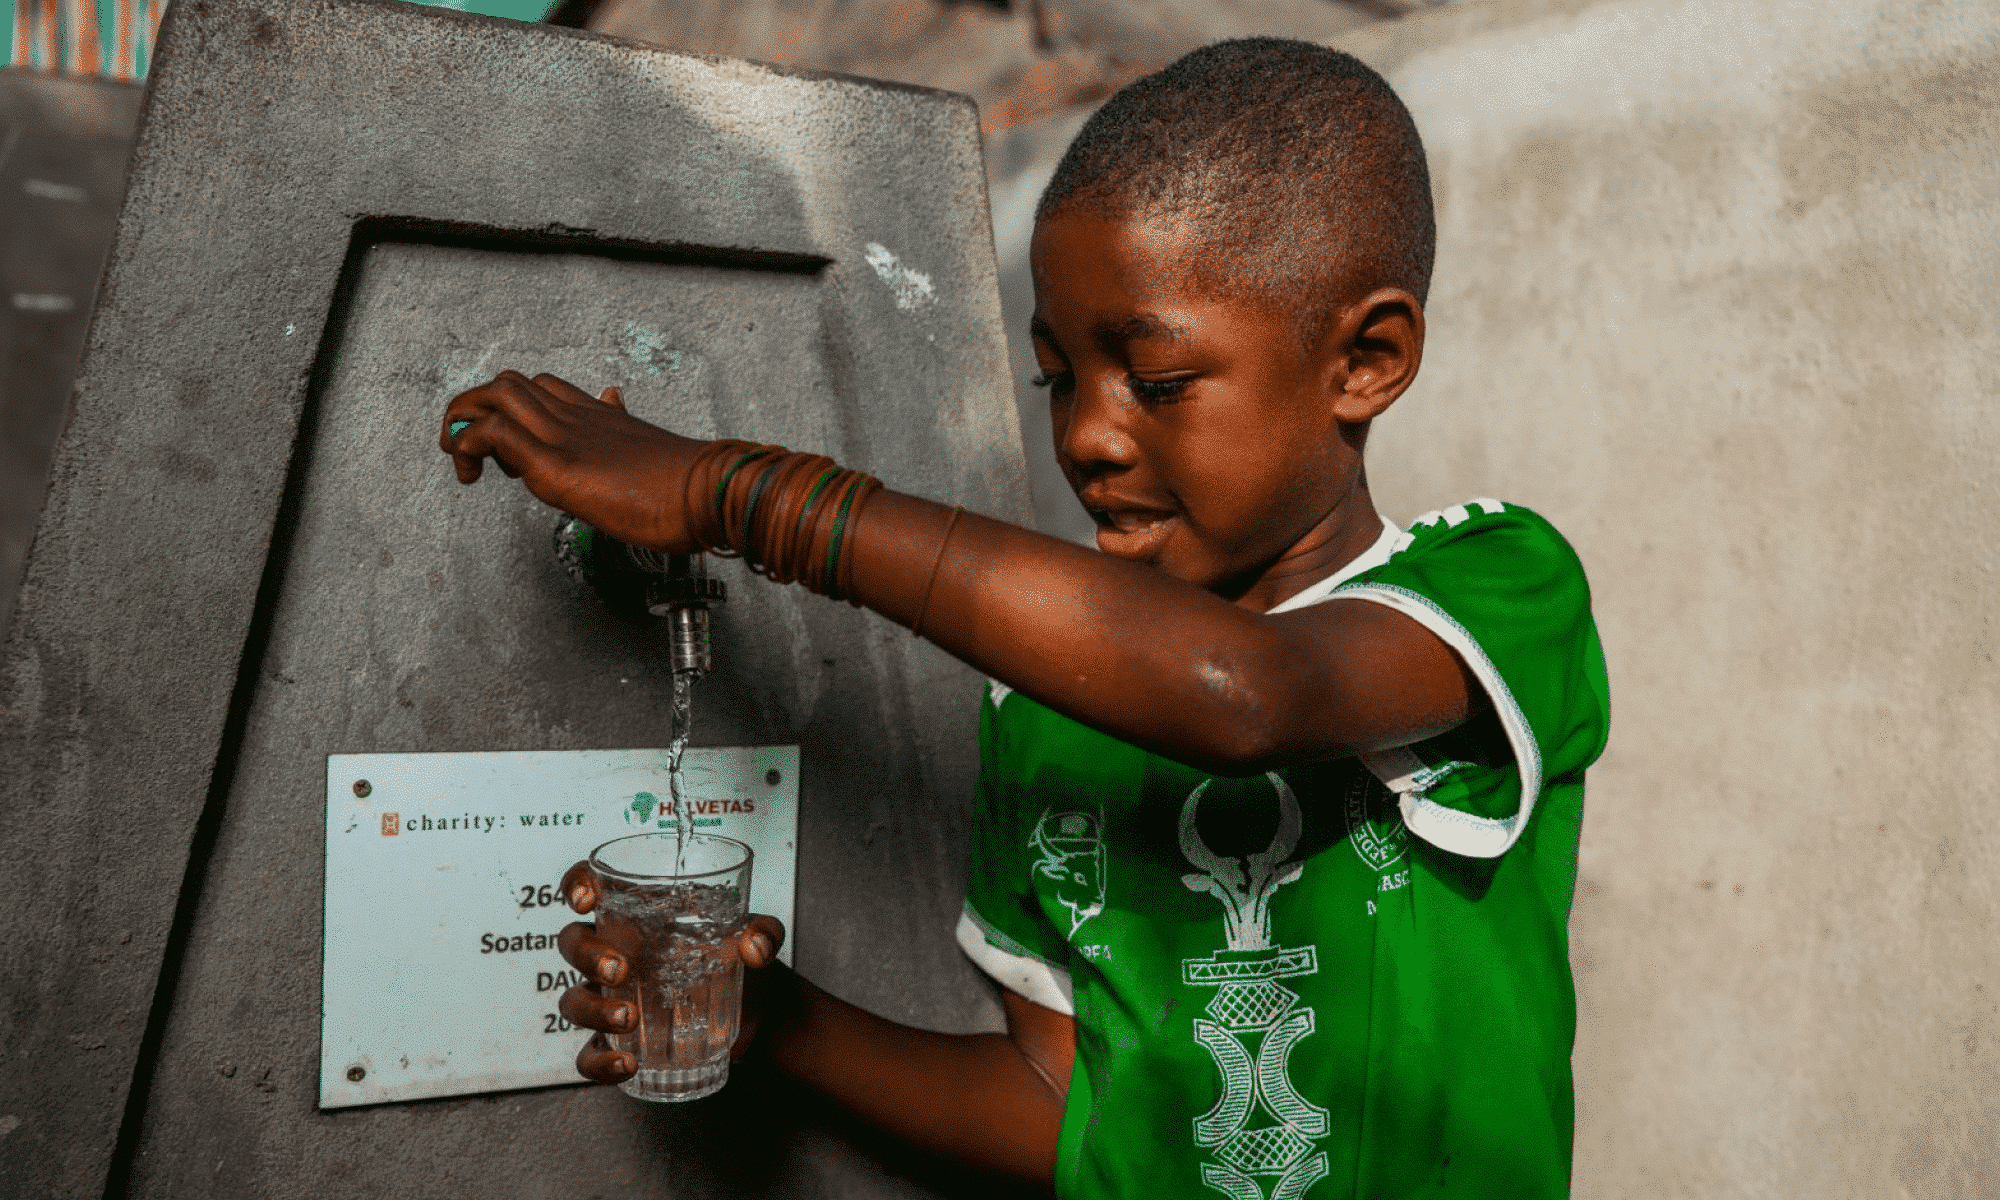 a young boy filling up a glass of water